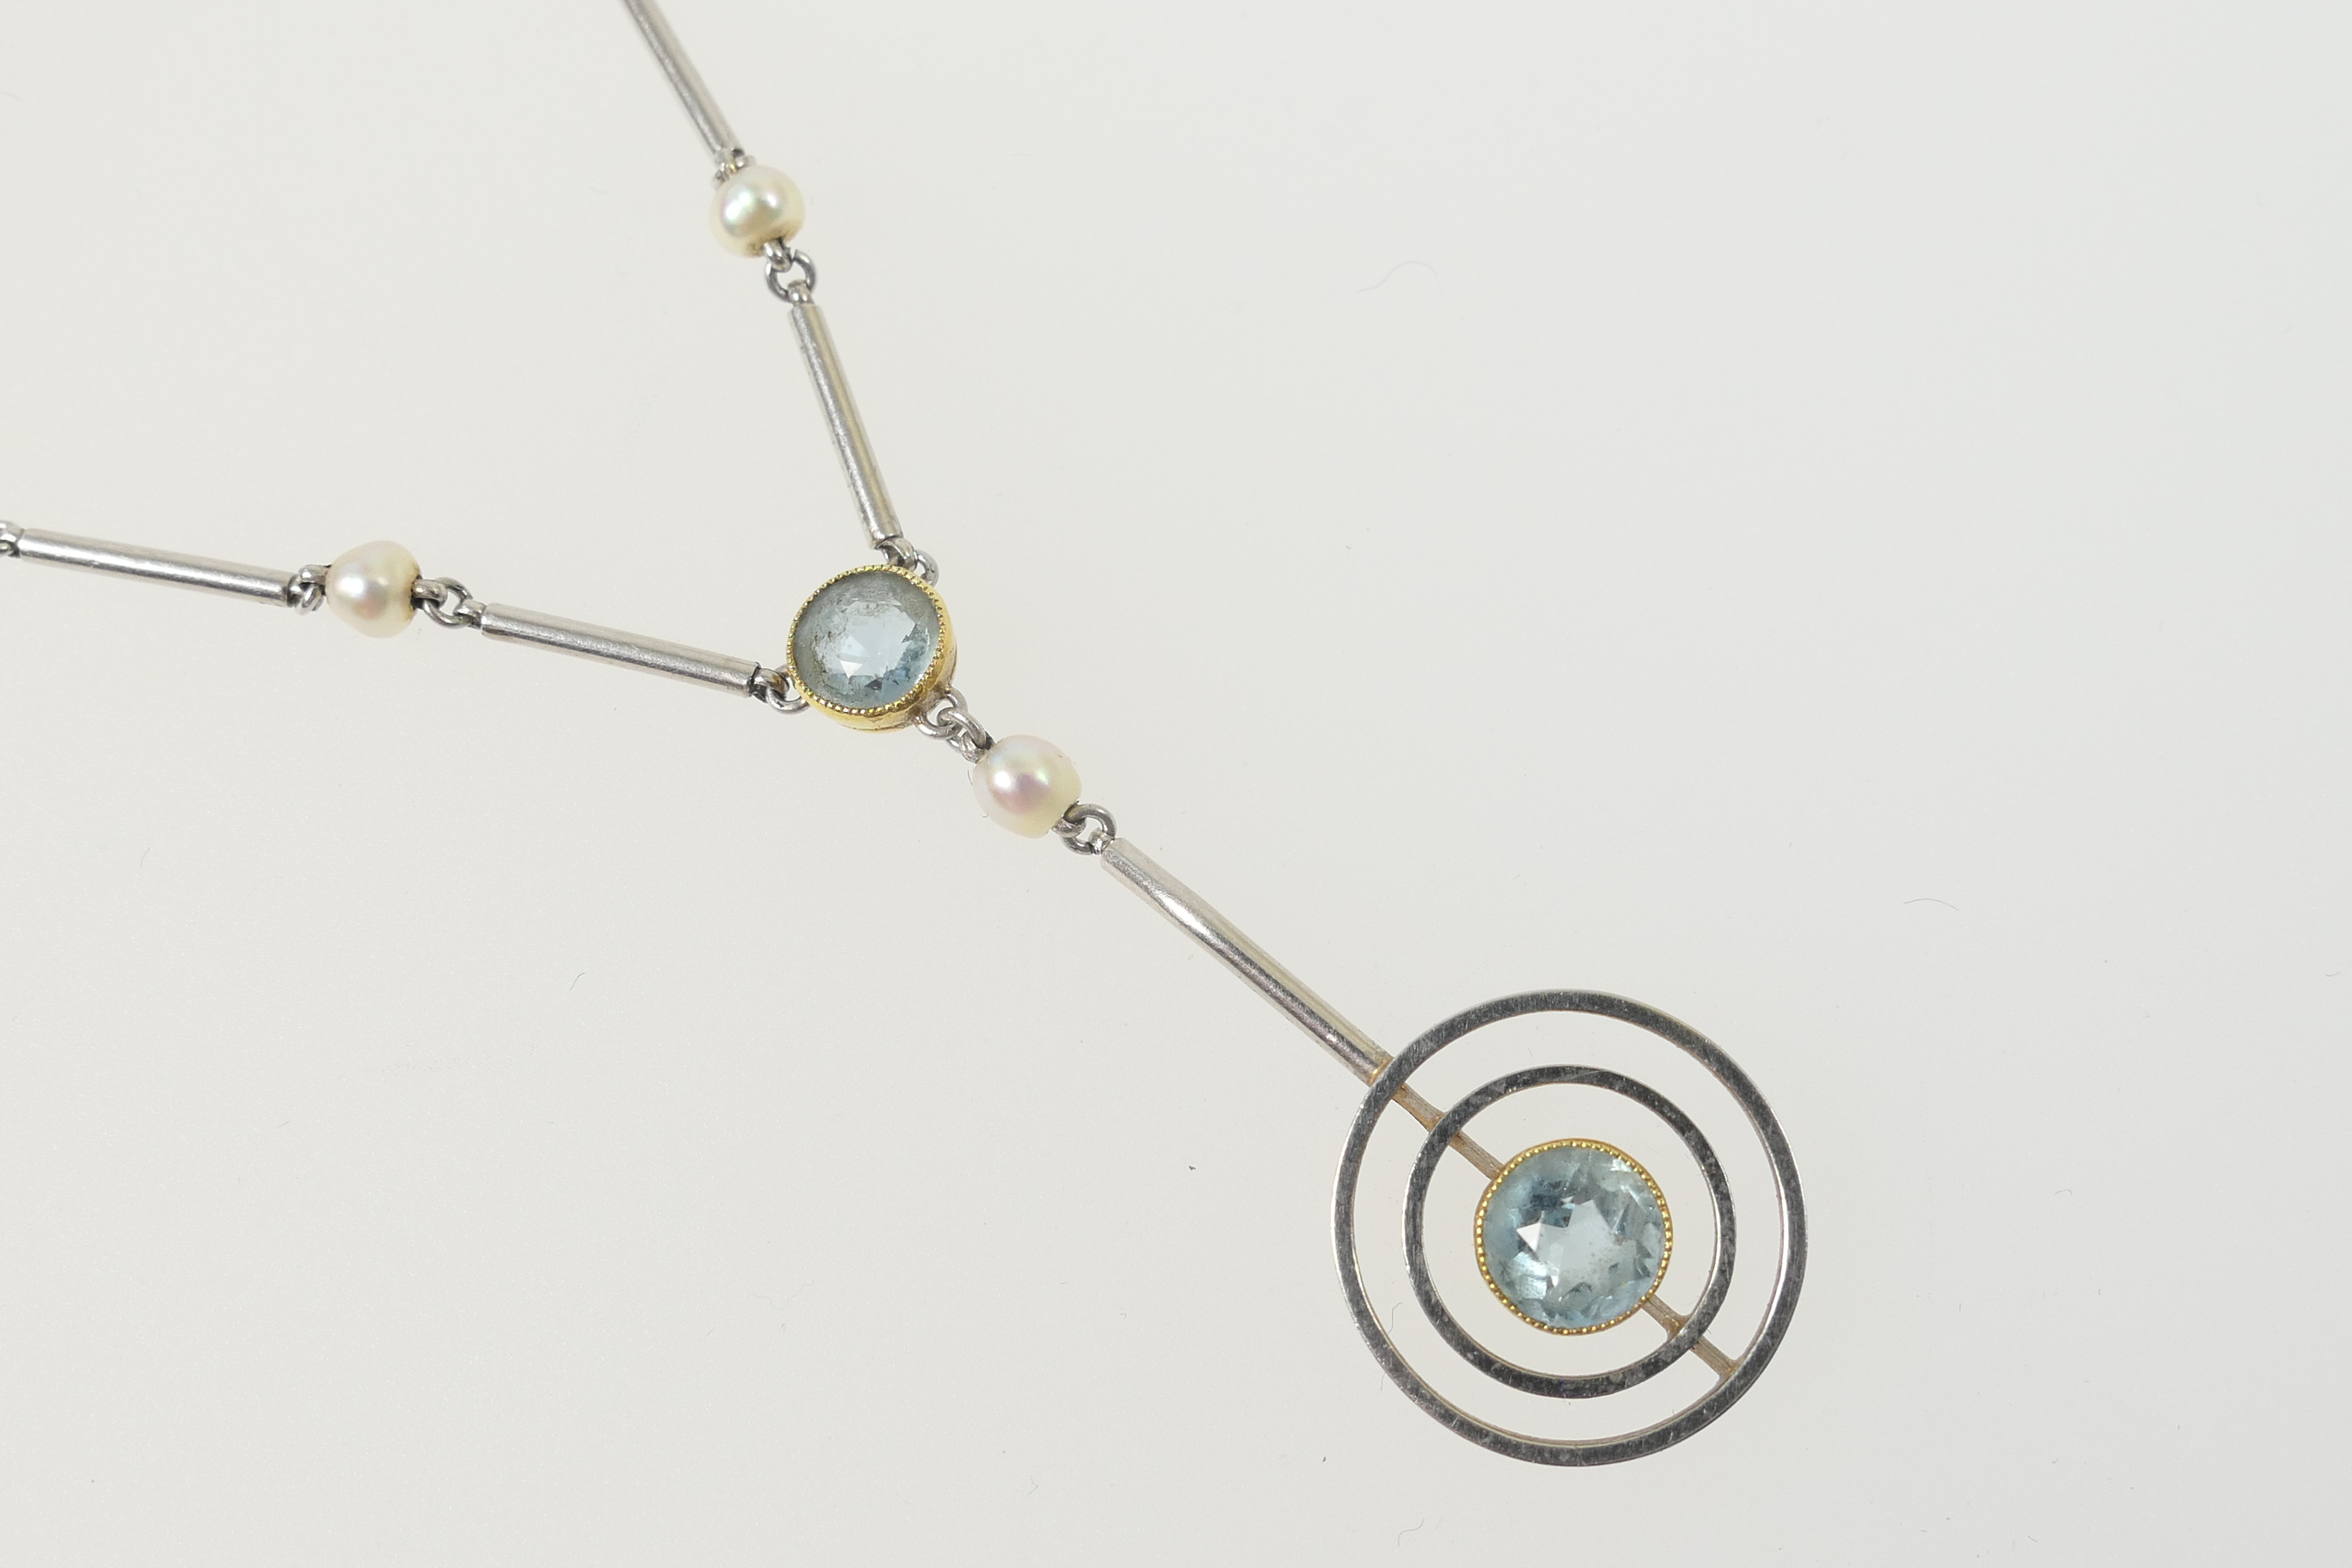 Edwardian aquamarine and pearl pendant necklace, circa 1910, the pendant centred with a round cut - Image 2 of 2